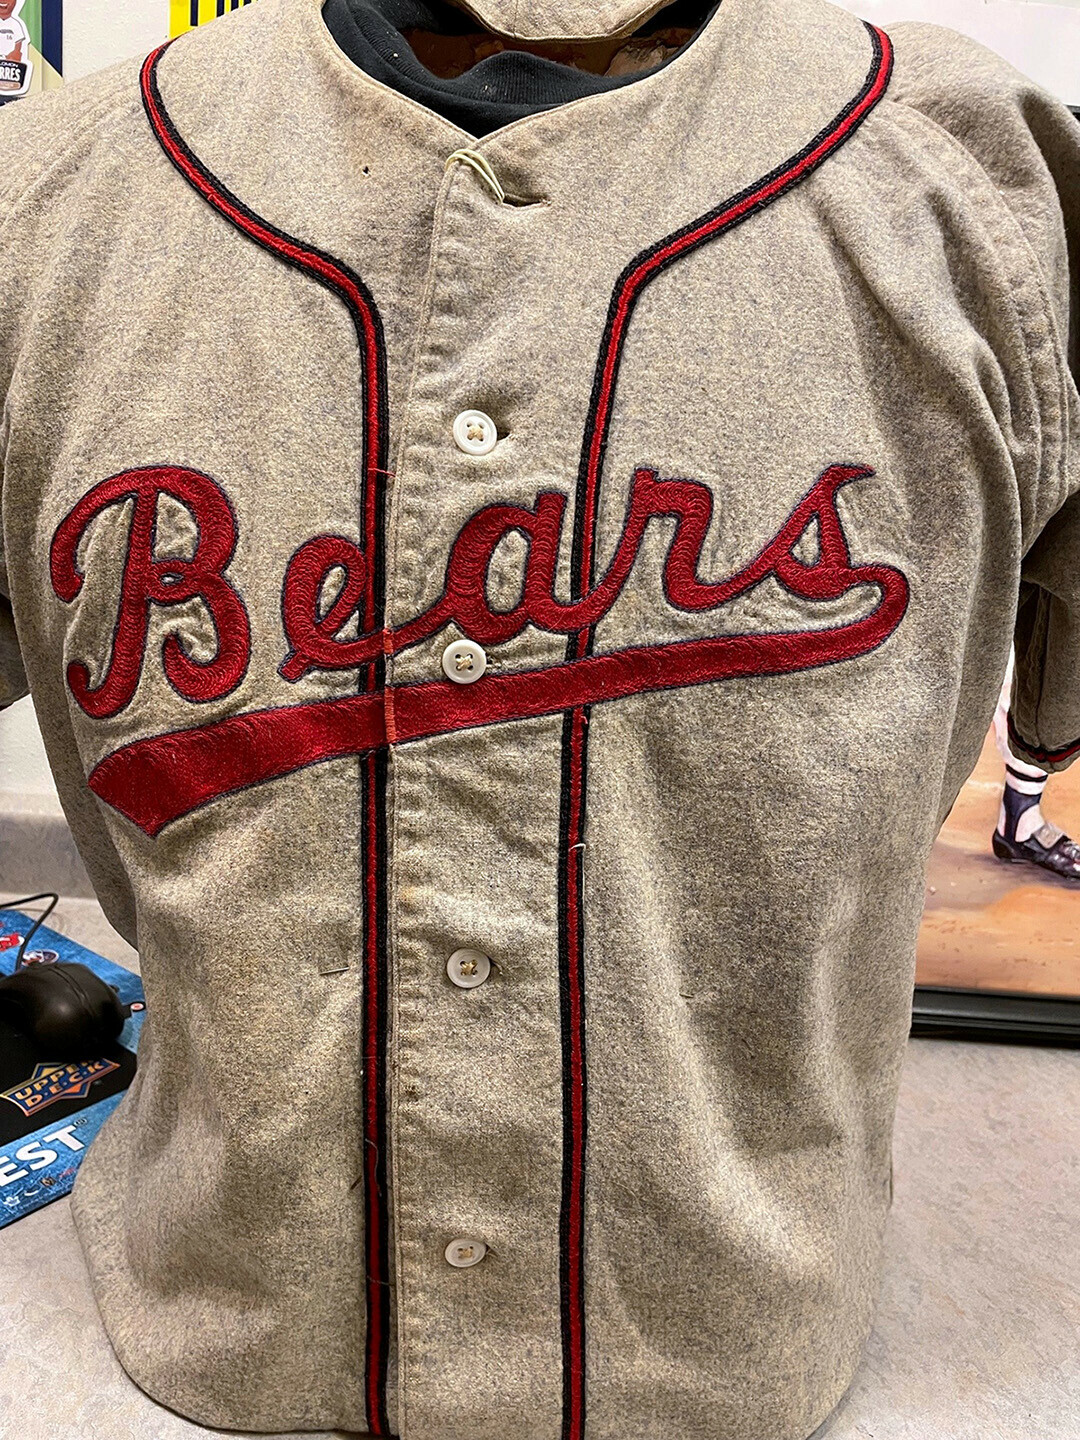 This 1952 Eau Claire Bears jersey is part of the collection of Eau Claire Baseball Committee